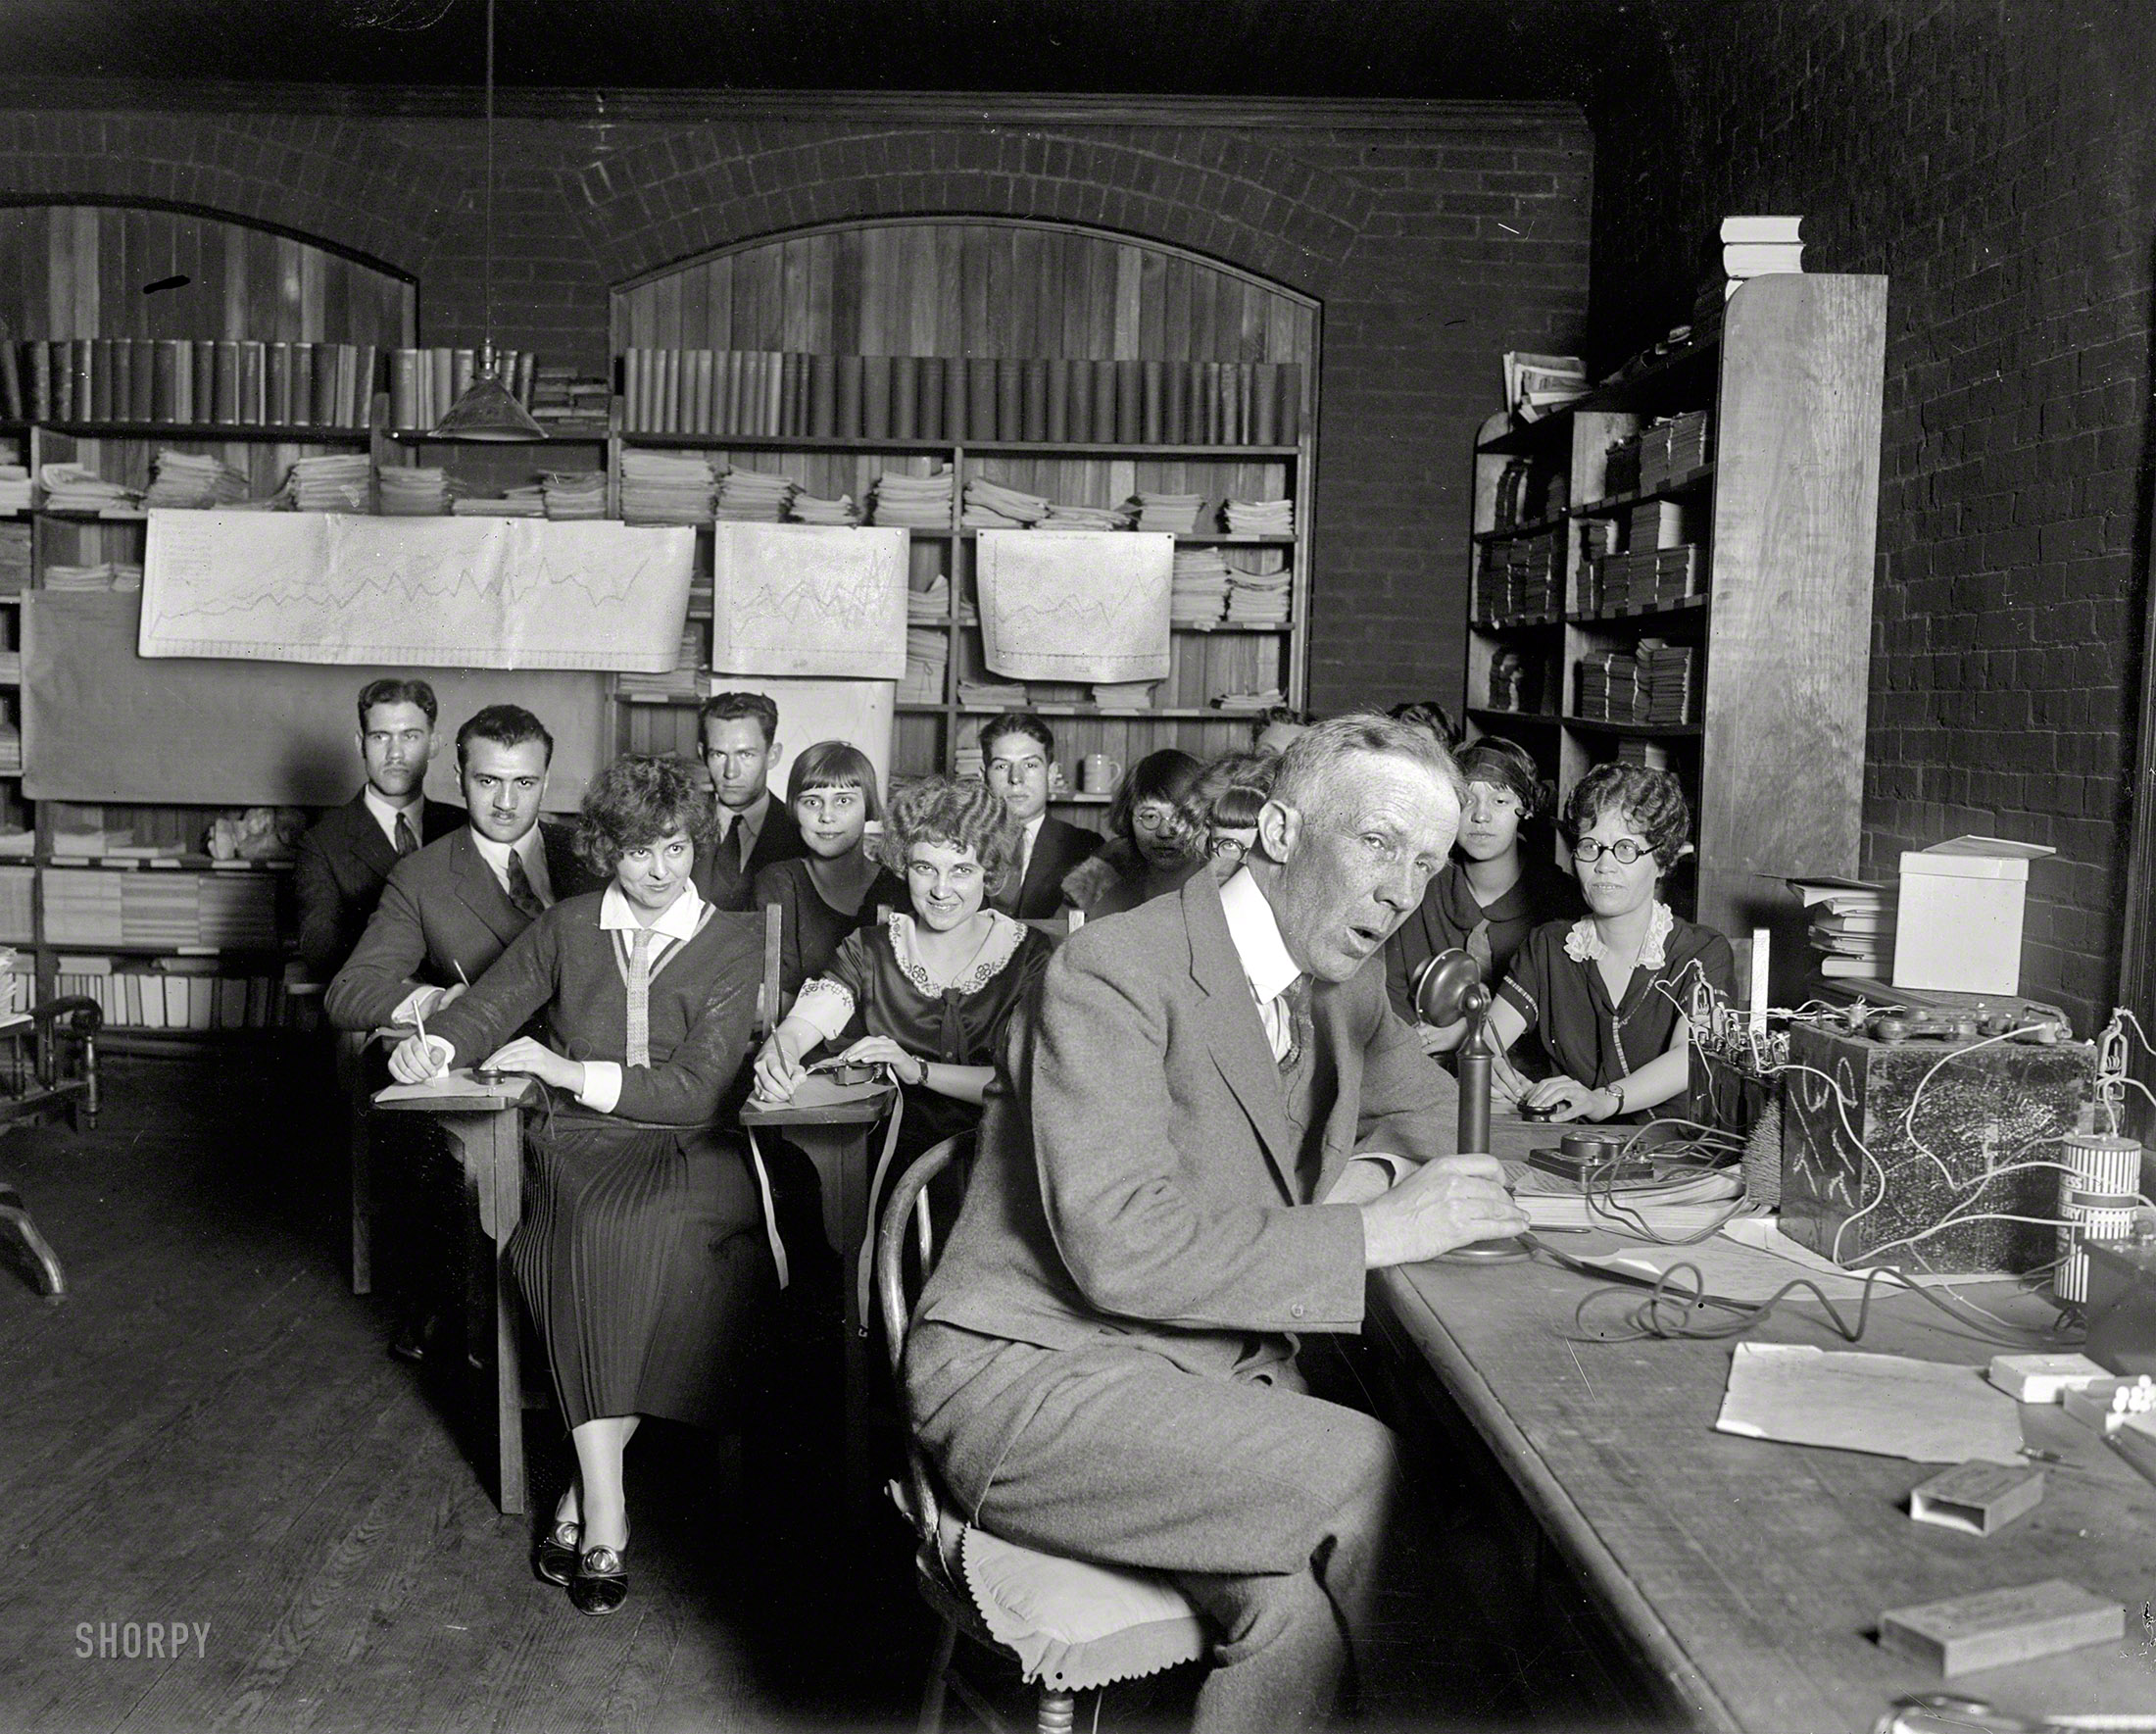 April 2, 1925. "Experiment at Gallaudet College by Prof. R.H. Gault." Last seen here, the Professor was attempting to "enable the deaf to understand what is said to them by feeling words with their fingers." National Photo Co. View full size.